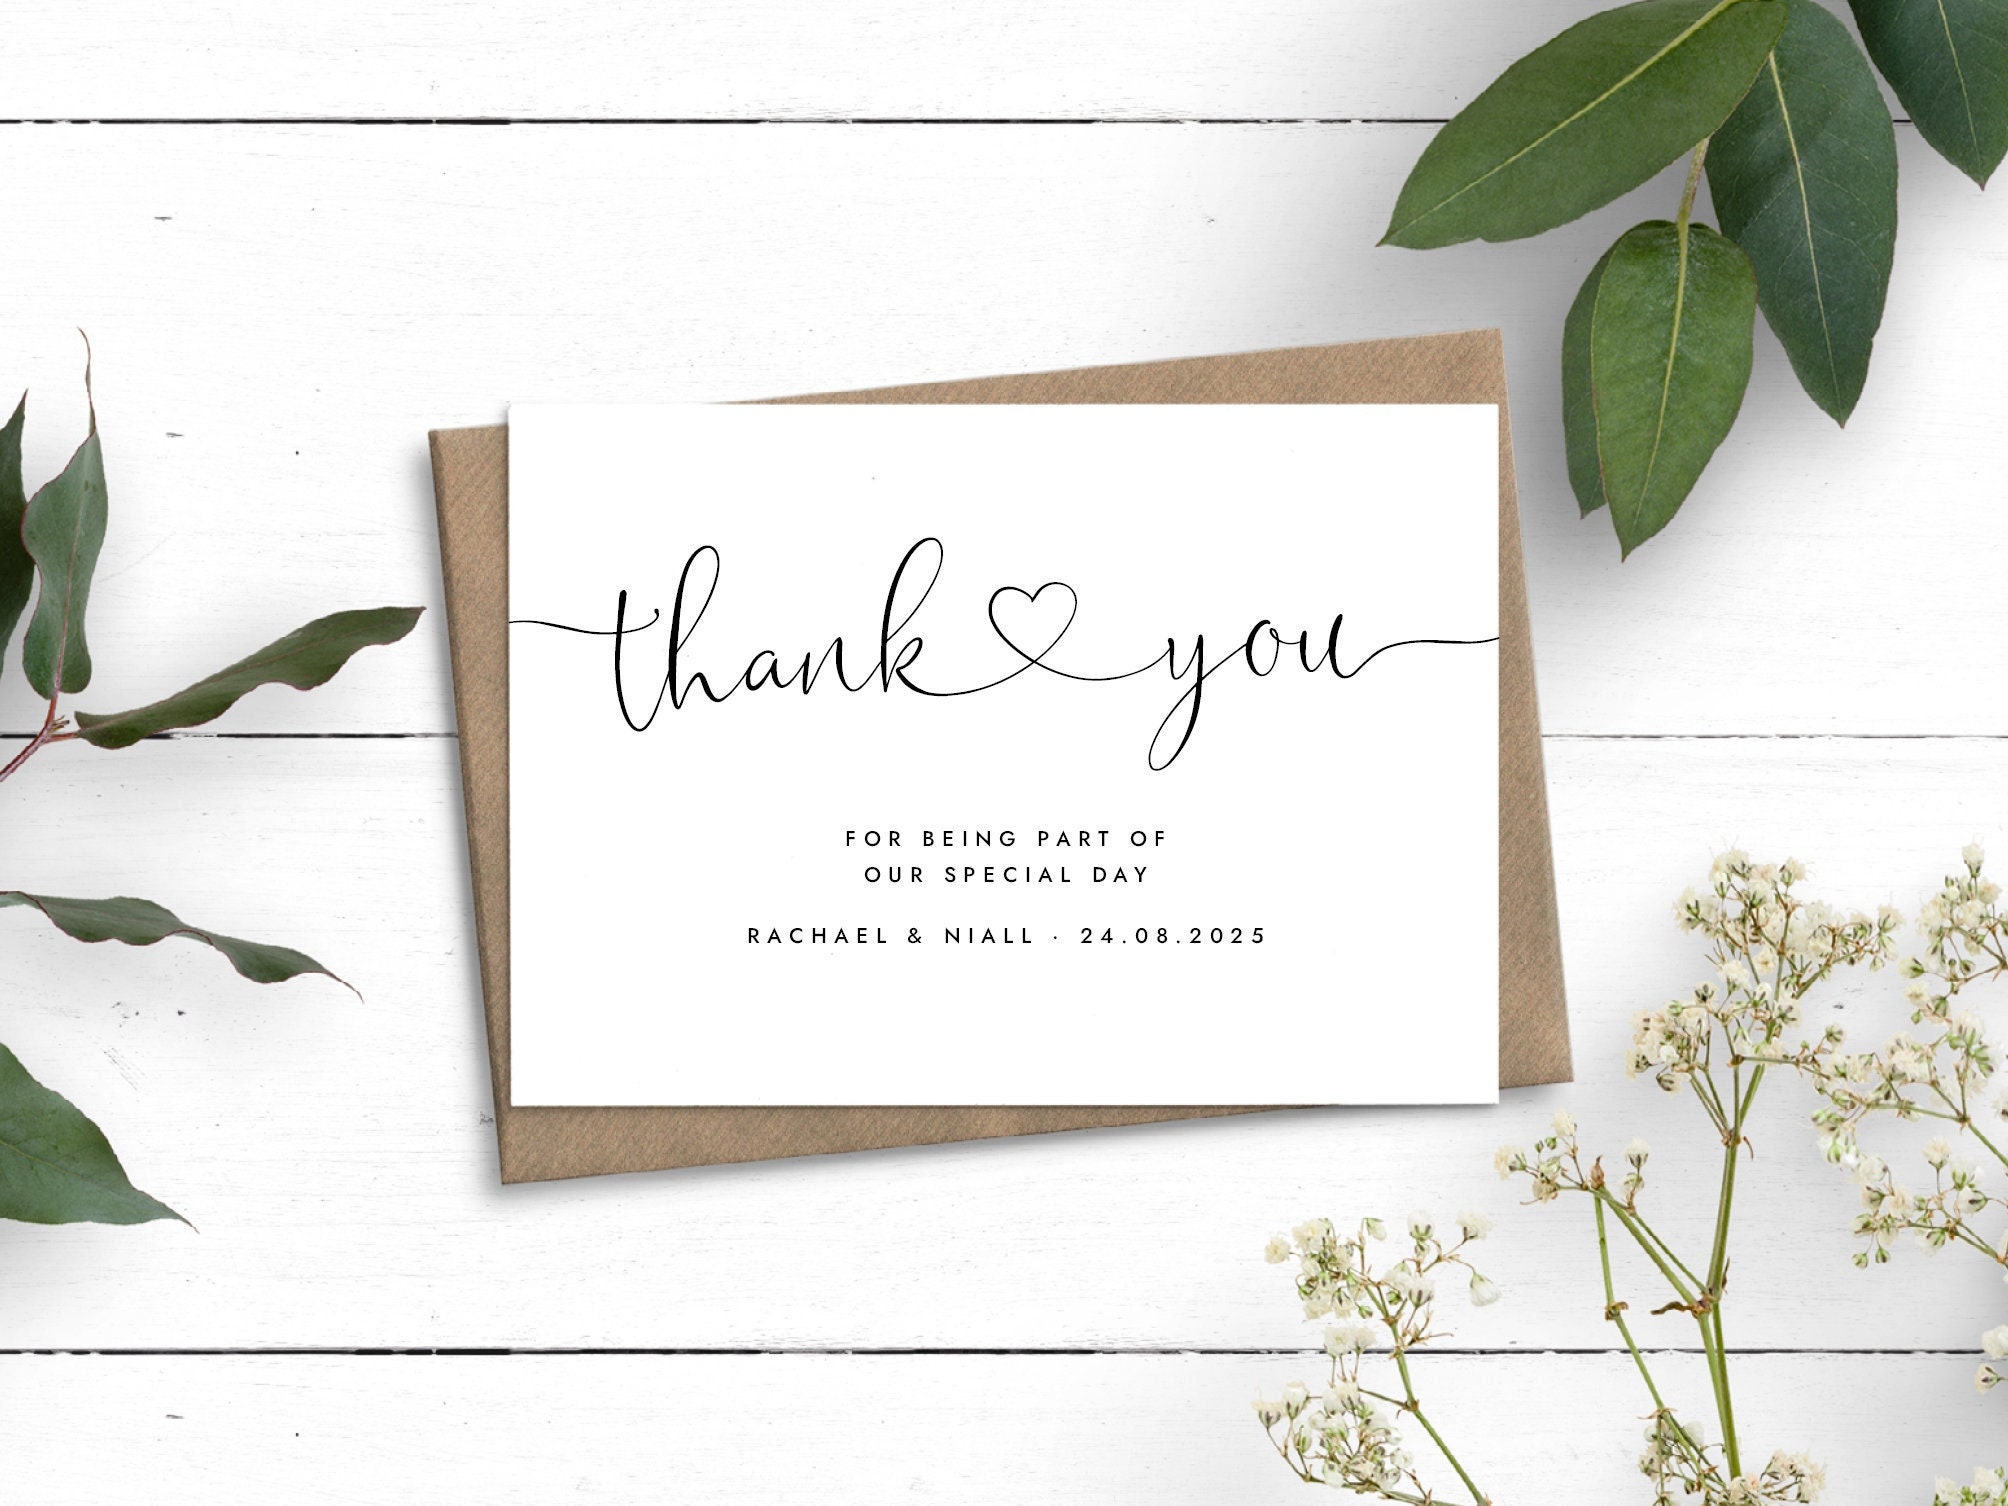  Premium All Occasion note cards with white envelopes, Made in  USA, Assorted Cards for Wedding, Engagement, Business, Bridal Shower and  All Occasion (Bulk 36-Pack, 4x6 Inches) BLANK INSIDE. : Health